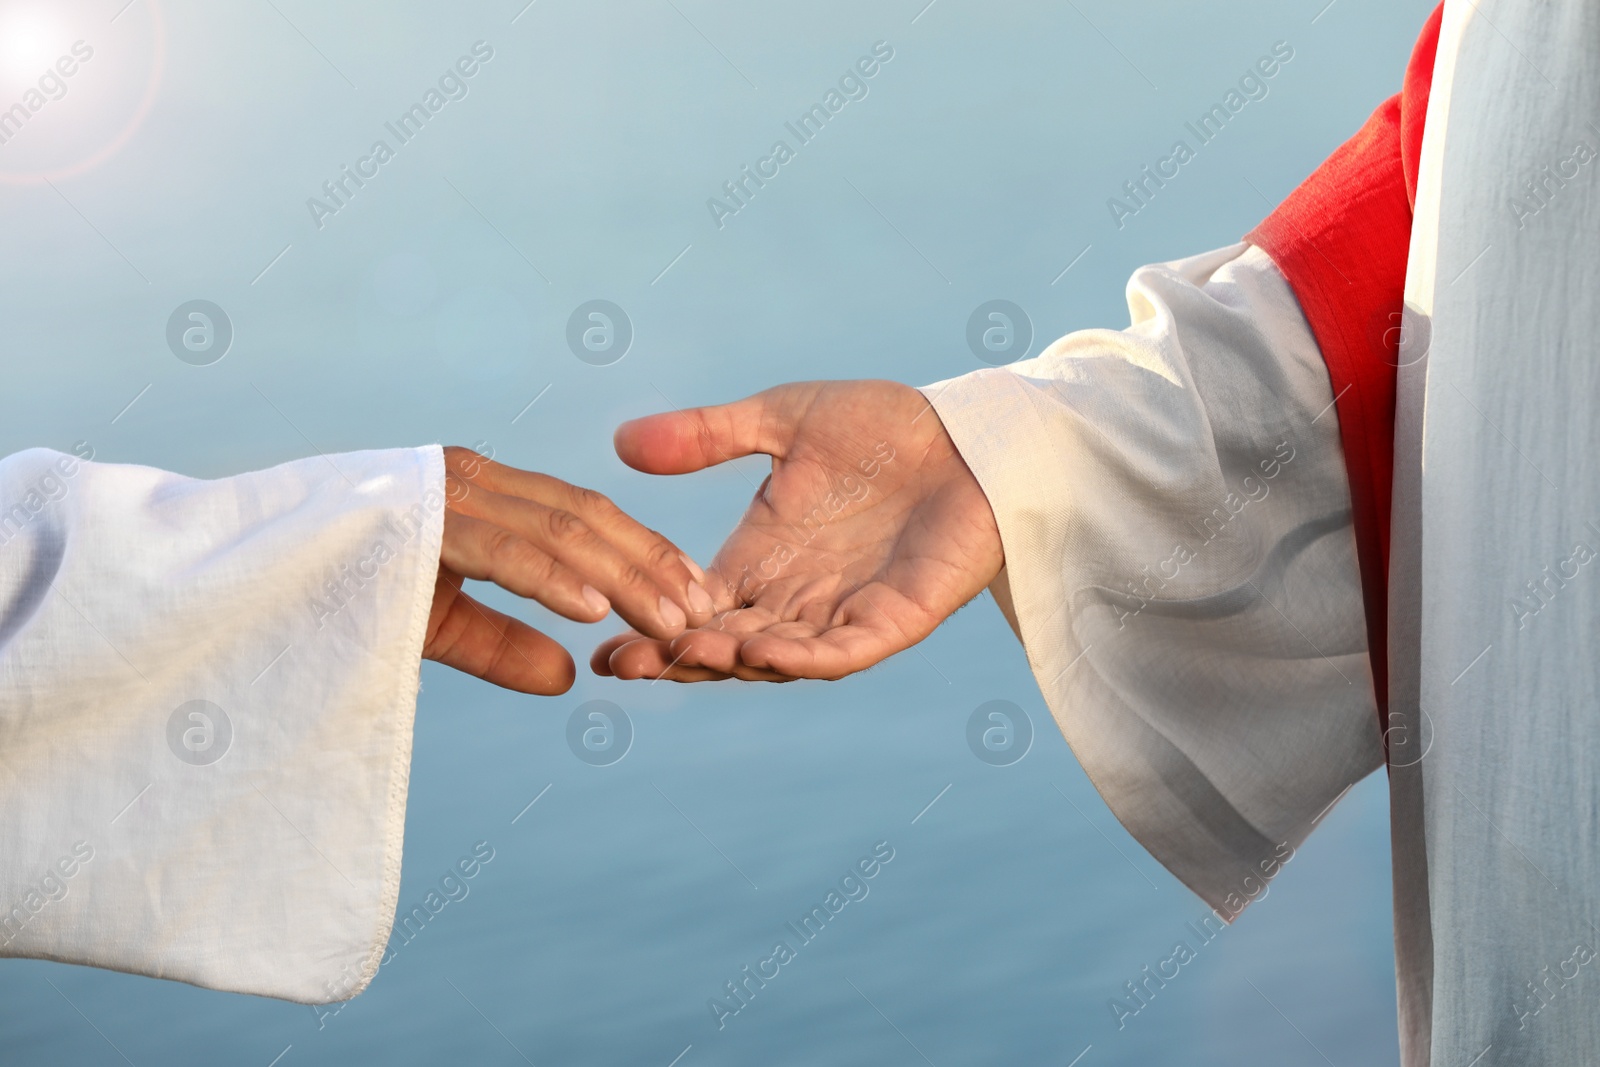 Photo of Man reaching for Jesus Christ's hand near water outdoors, closeup